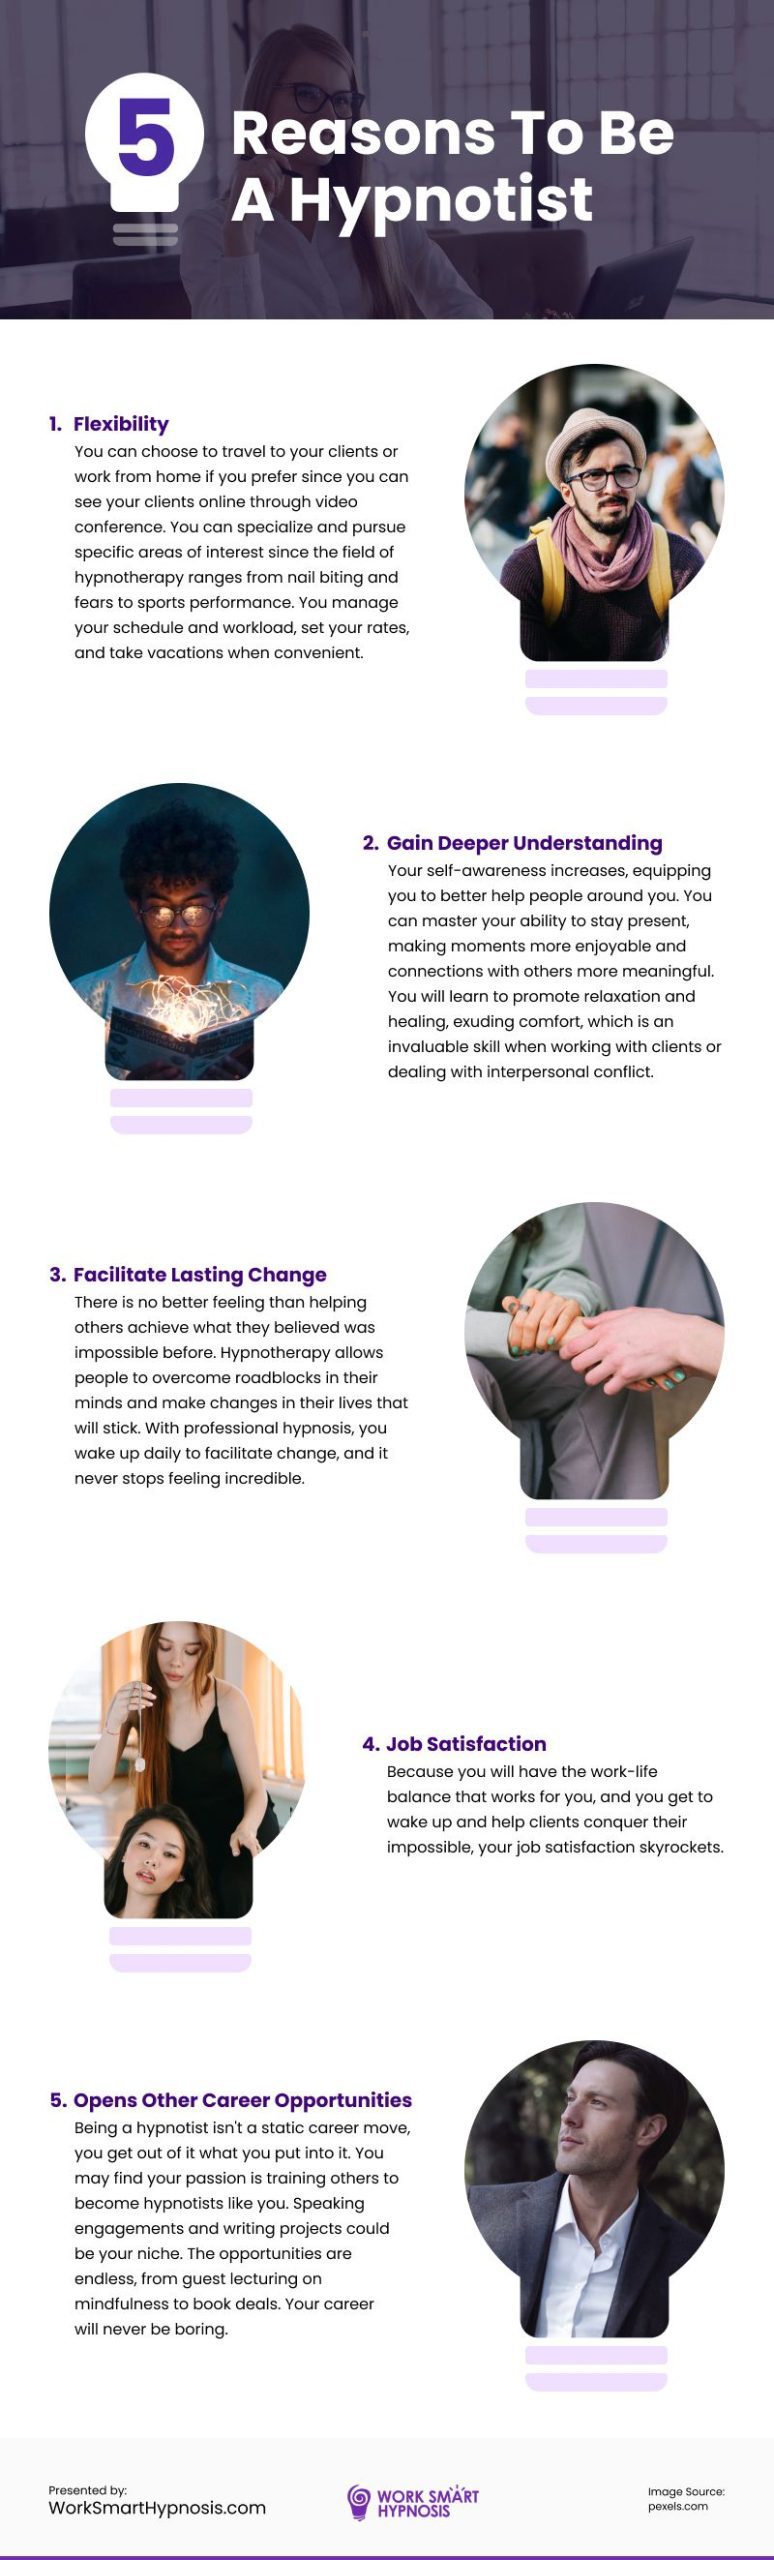 5 Reasons To Be A Hypnotist Infographic